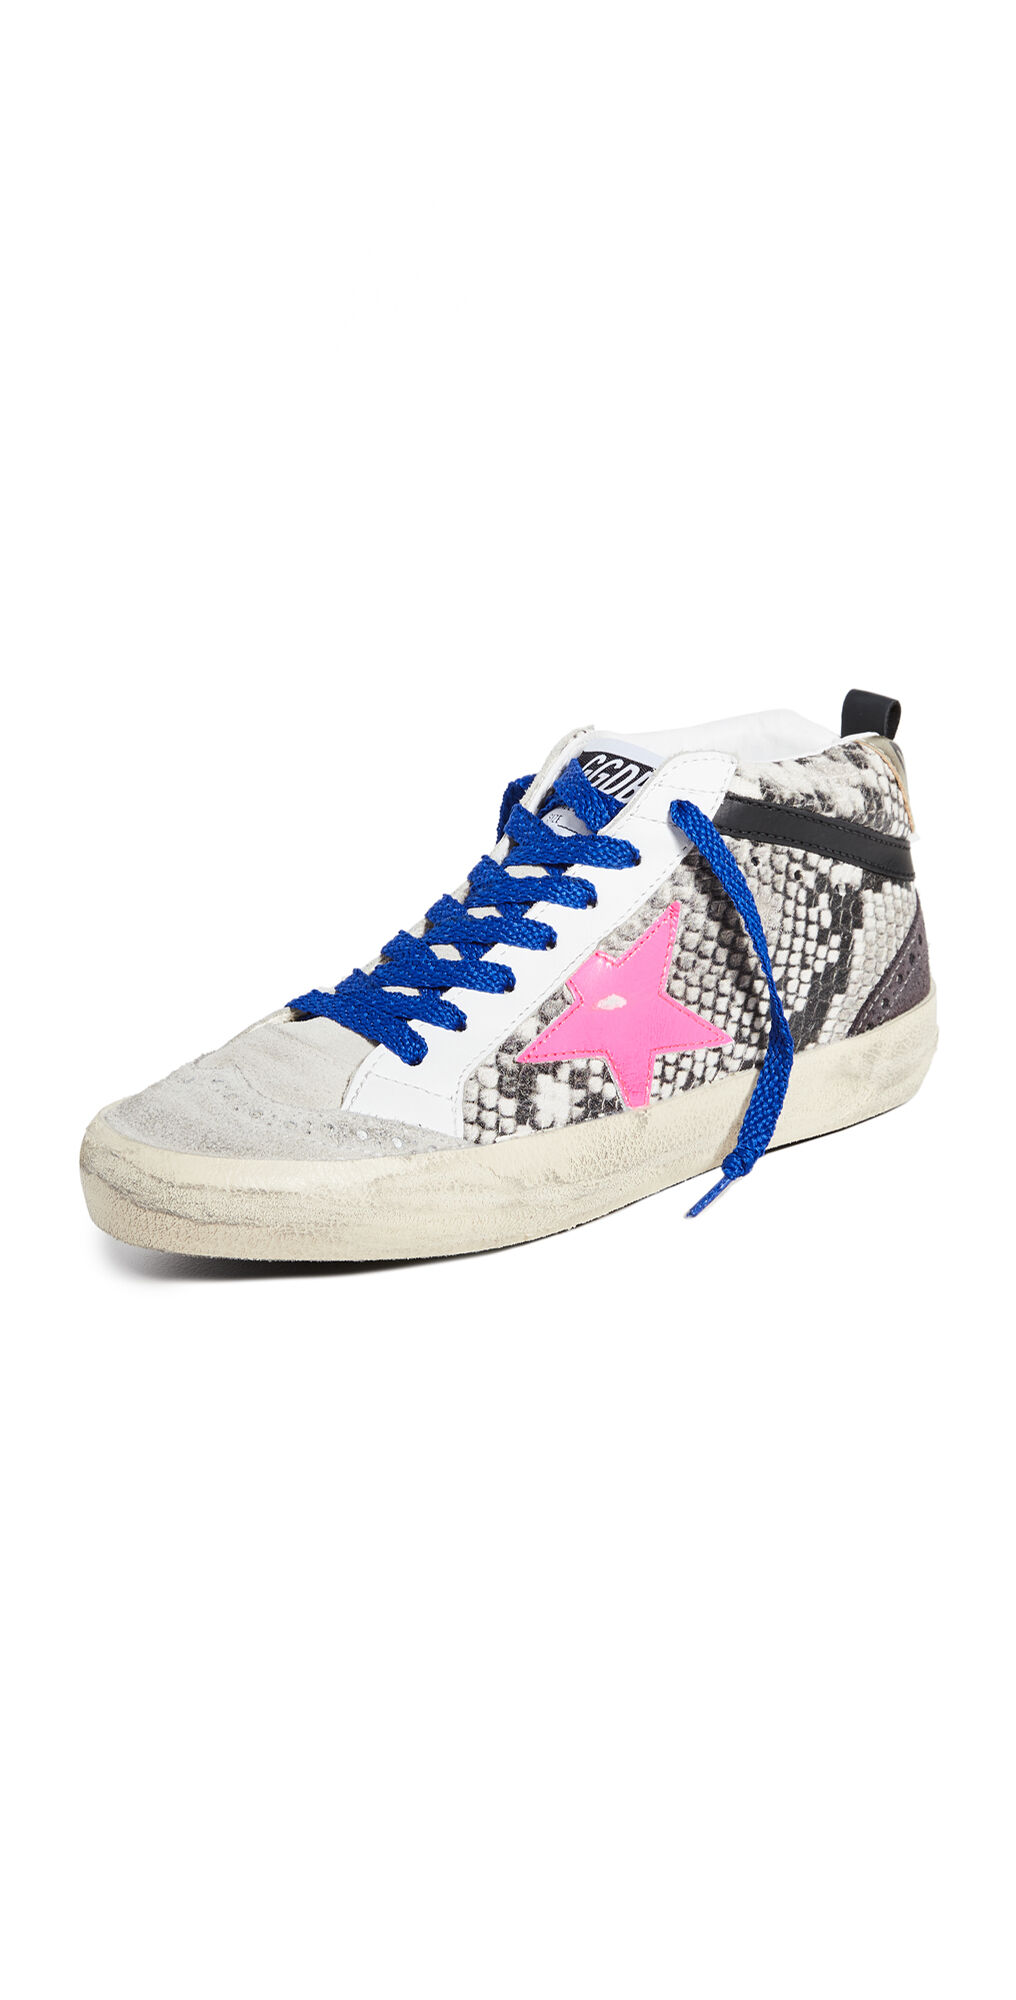 Golden Goose Mid Star Sneakers Snake/Fuxia 37  Snake/Fuxia  size:37